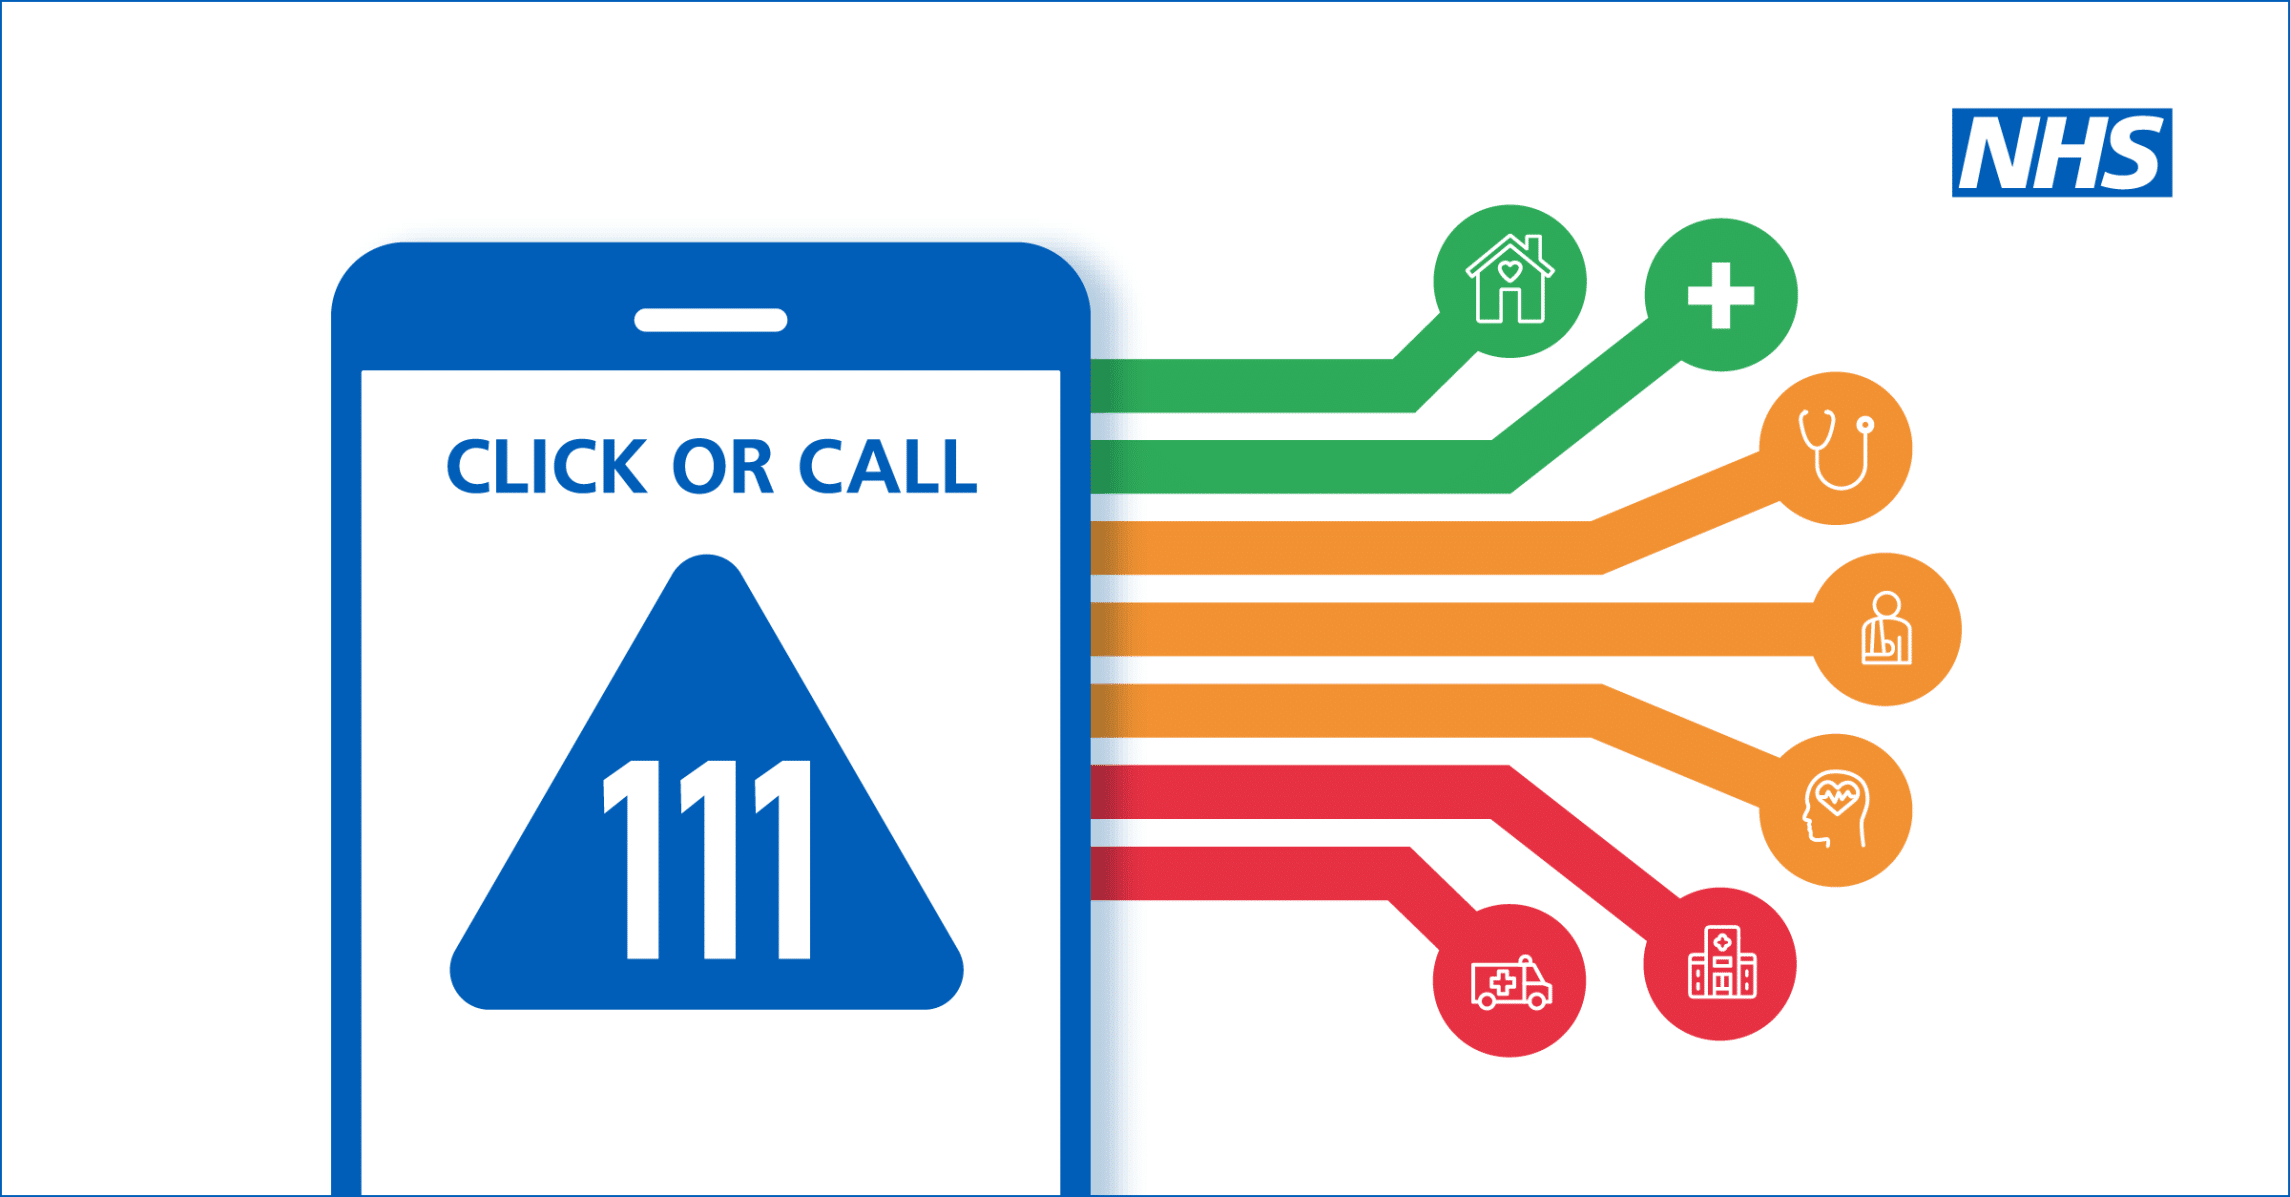 AgencyUK NHS Dial 111 Campaign